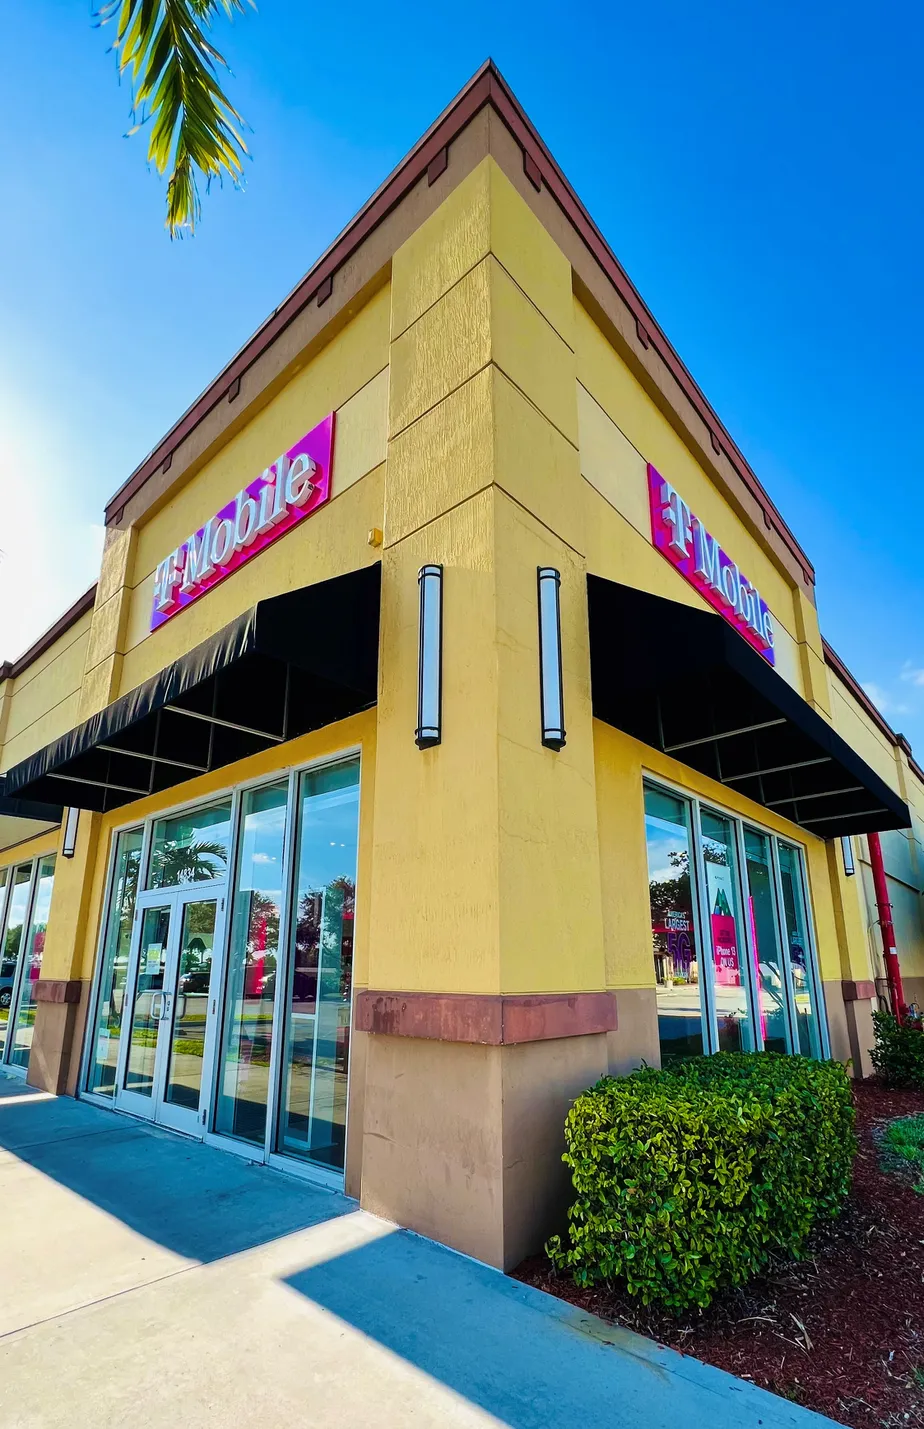 Exterior photo of T-Mobile Store at Pines & I-75, Pembroke Pines, FL